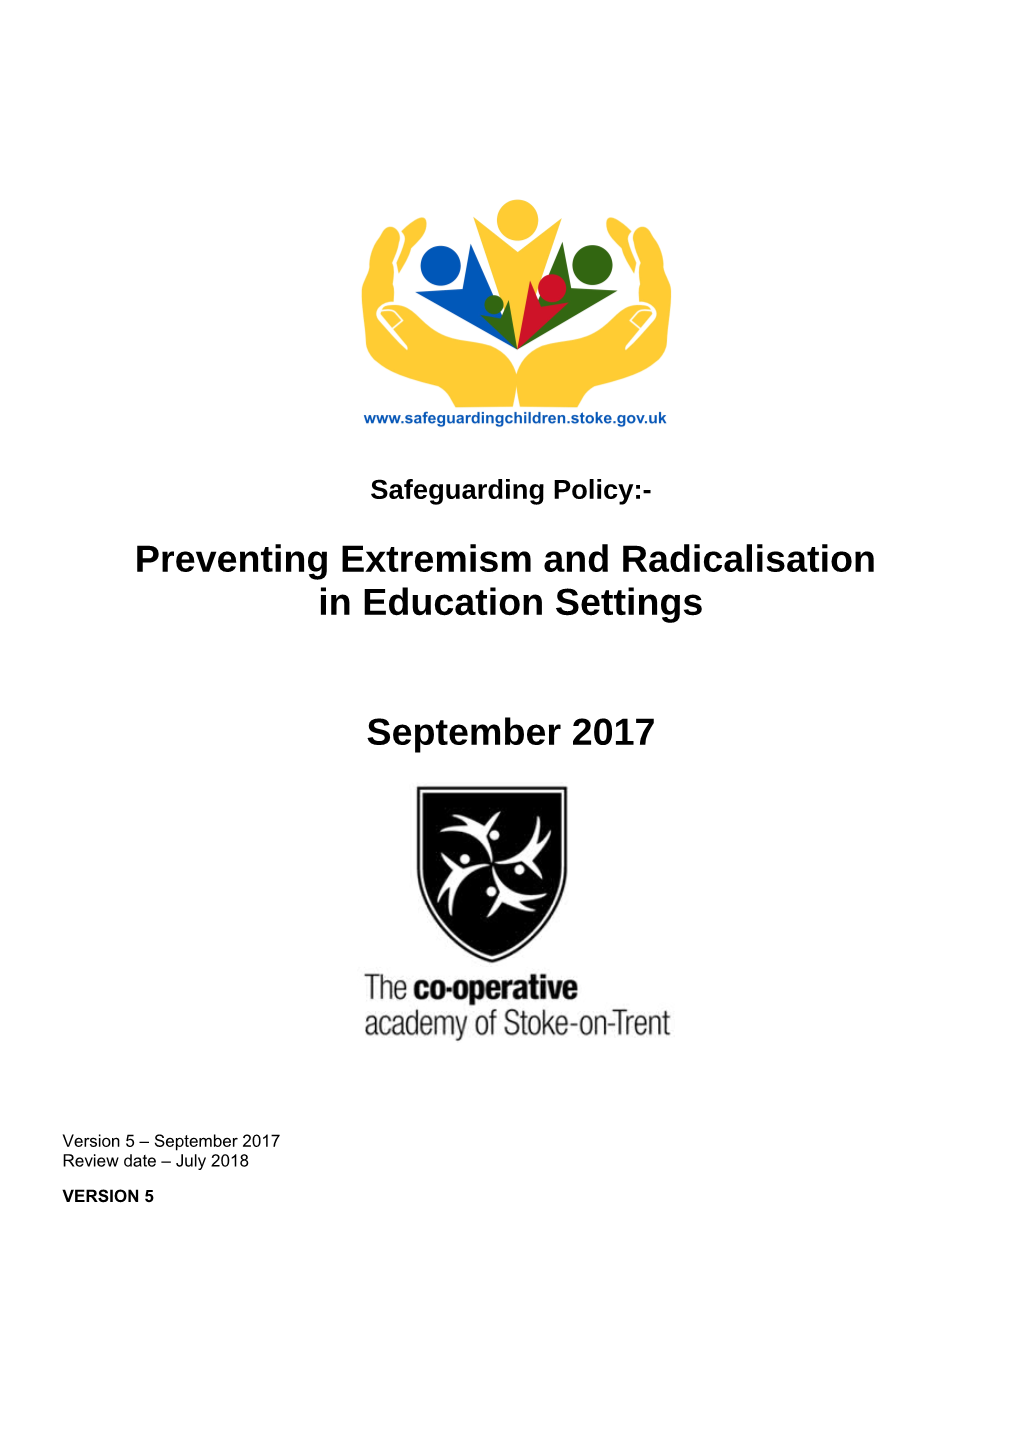 Preventing Extremism and Radicalisation Safeguarding Policy